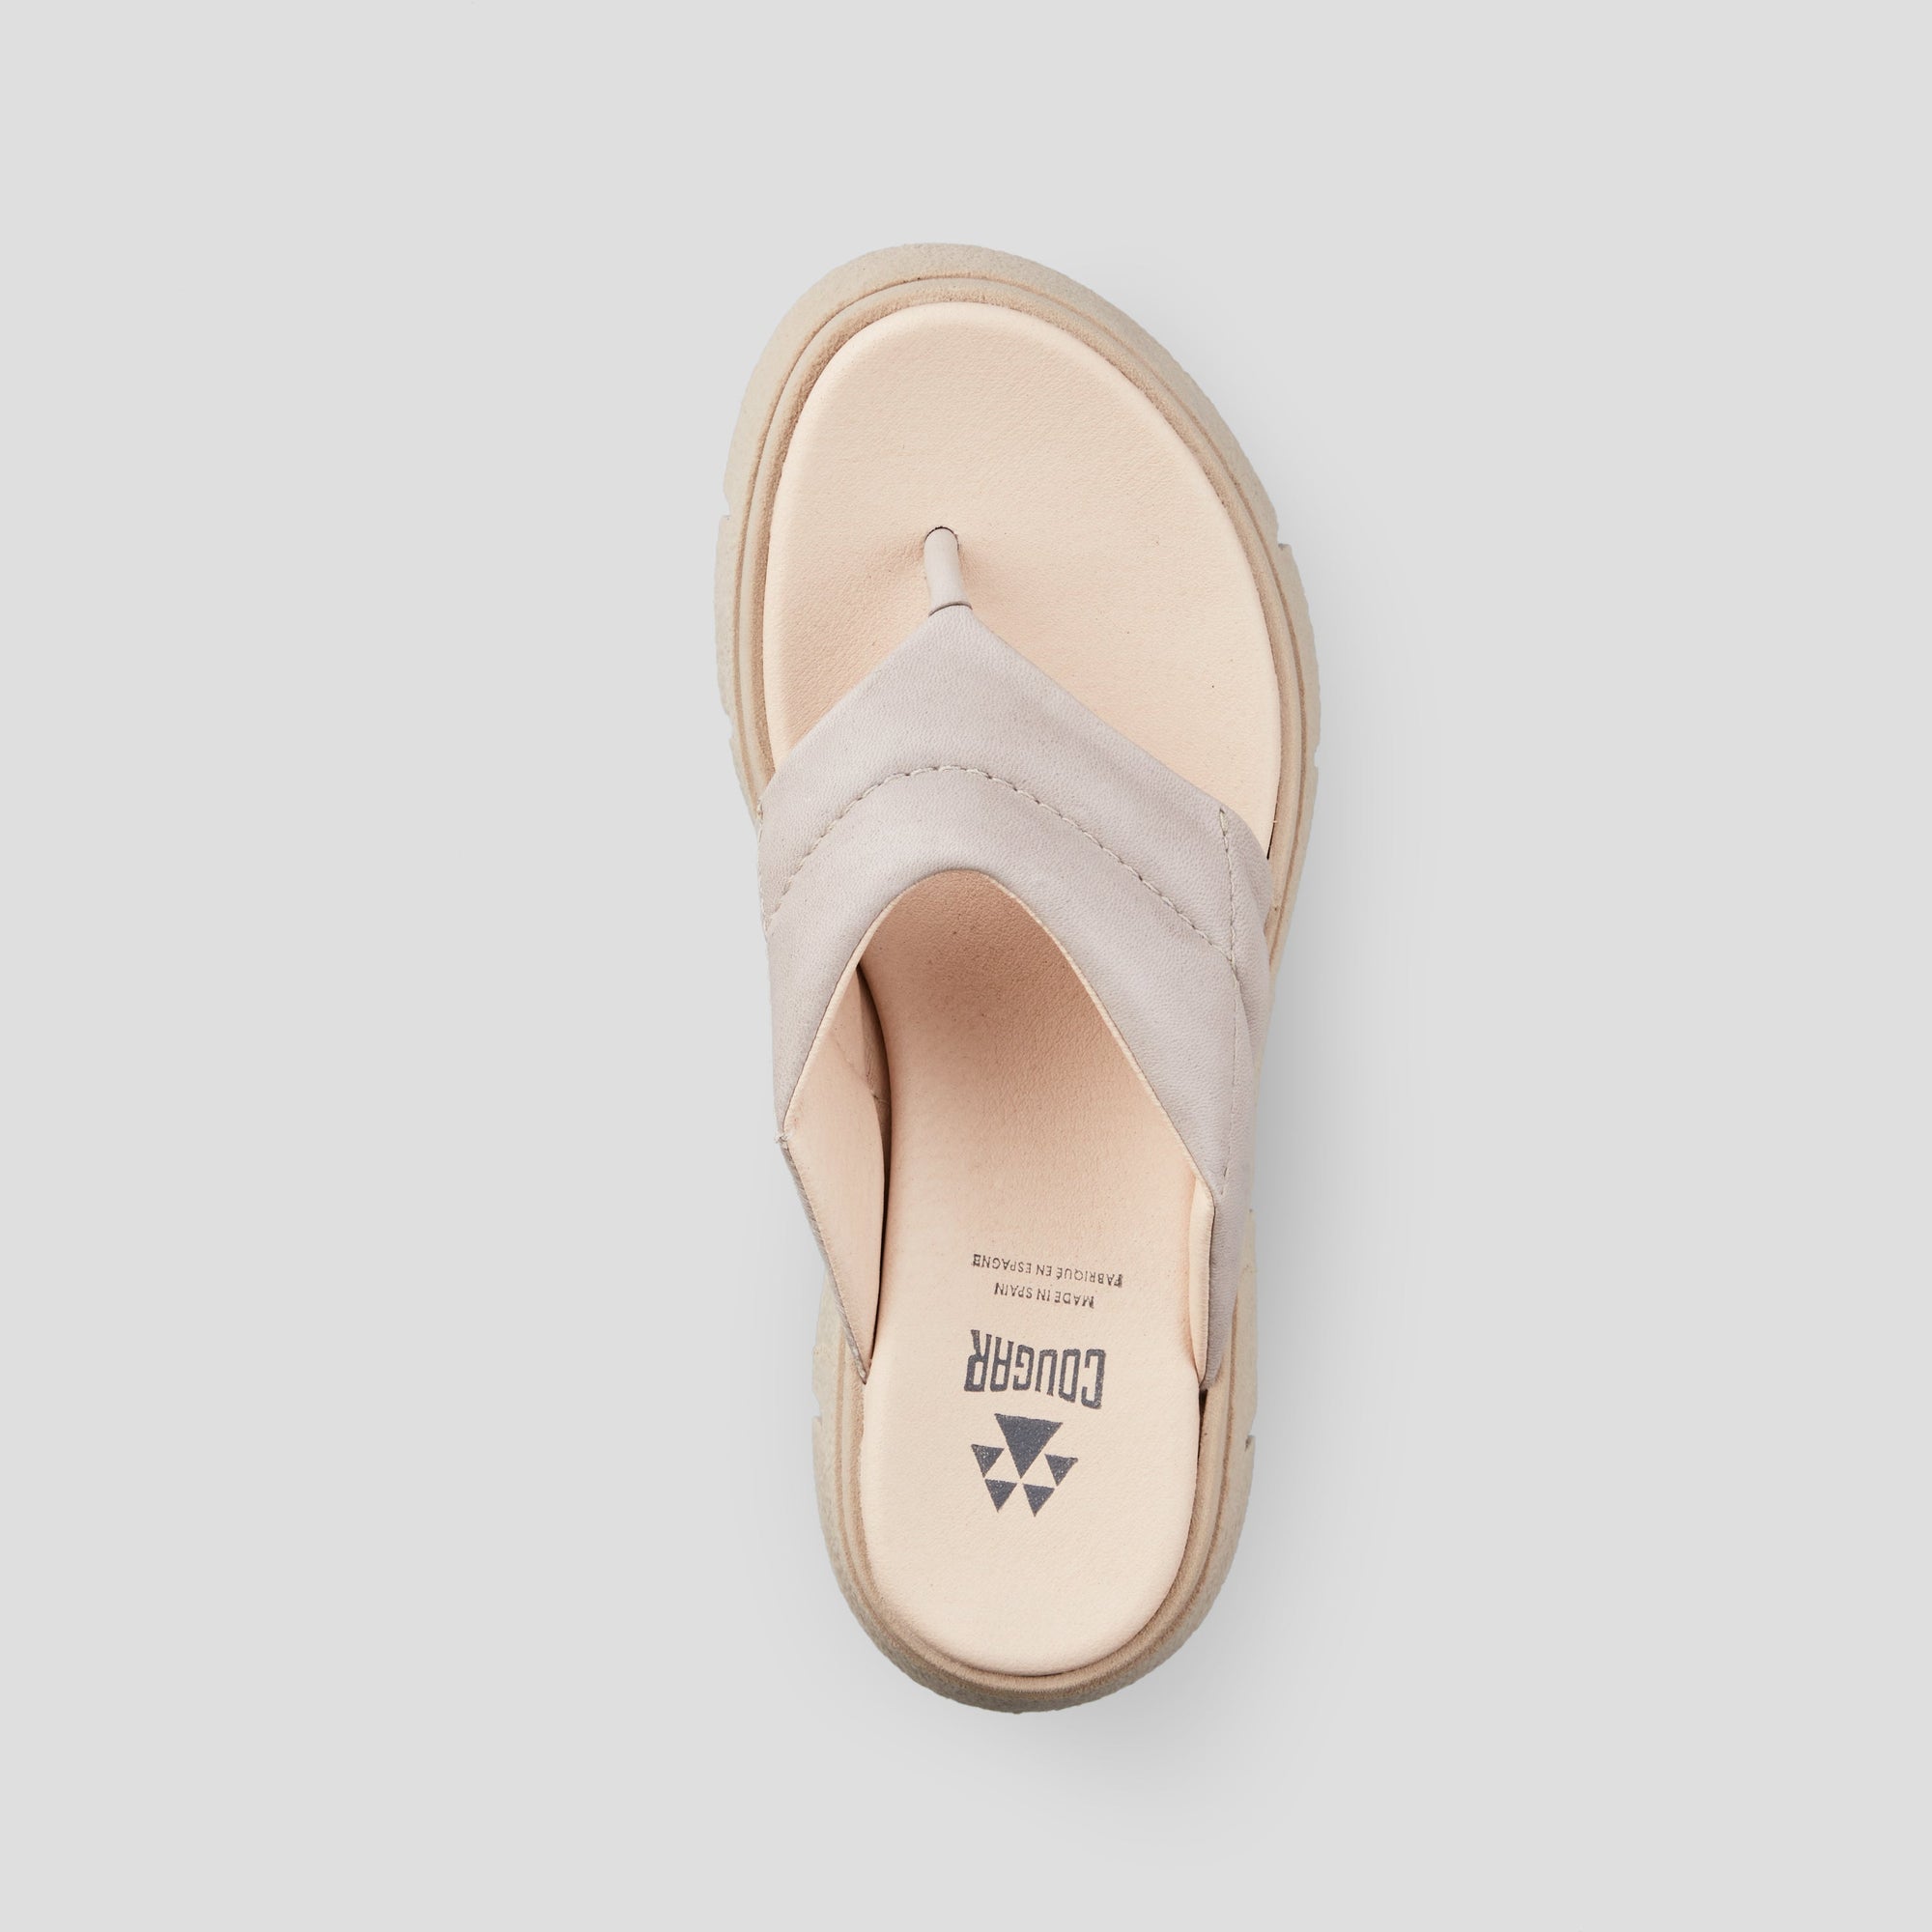 Abba Luxmotion Leather Thong Wedge Sandal - Color Oatmeal